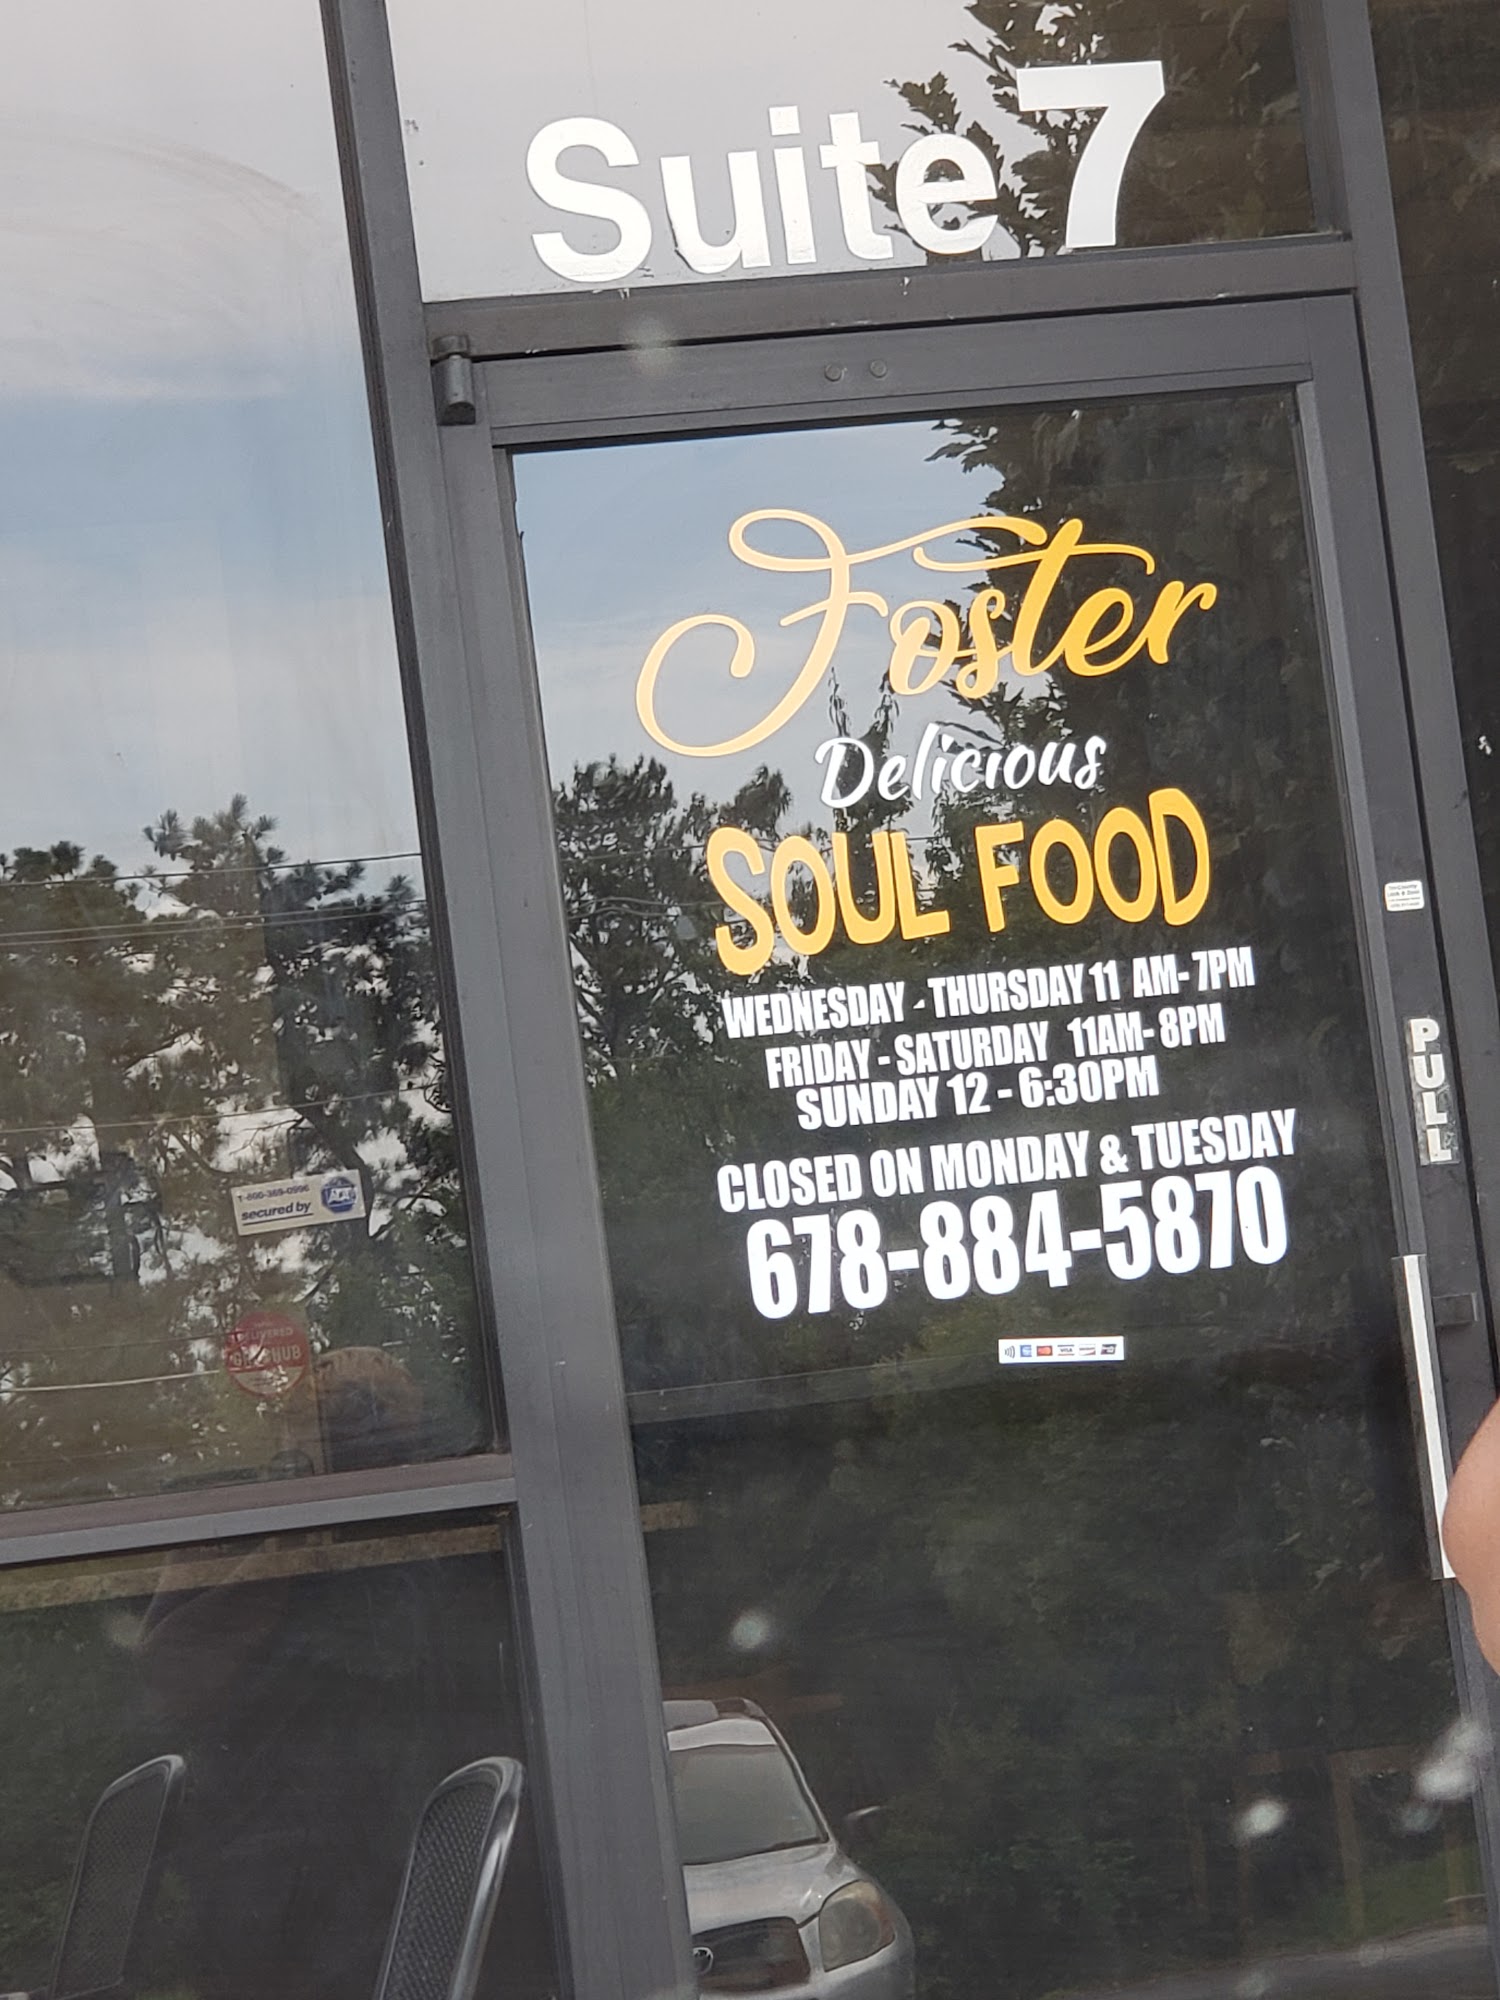 Foster Delicious Soul Food